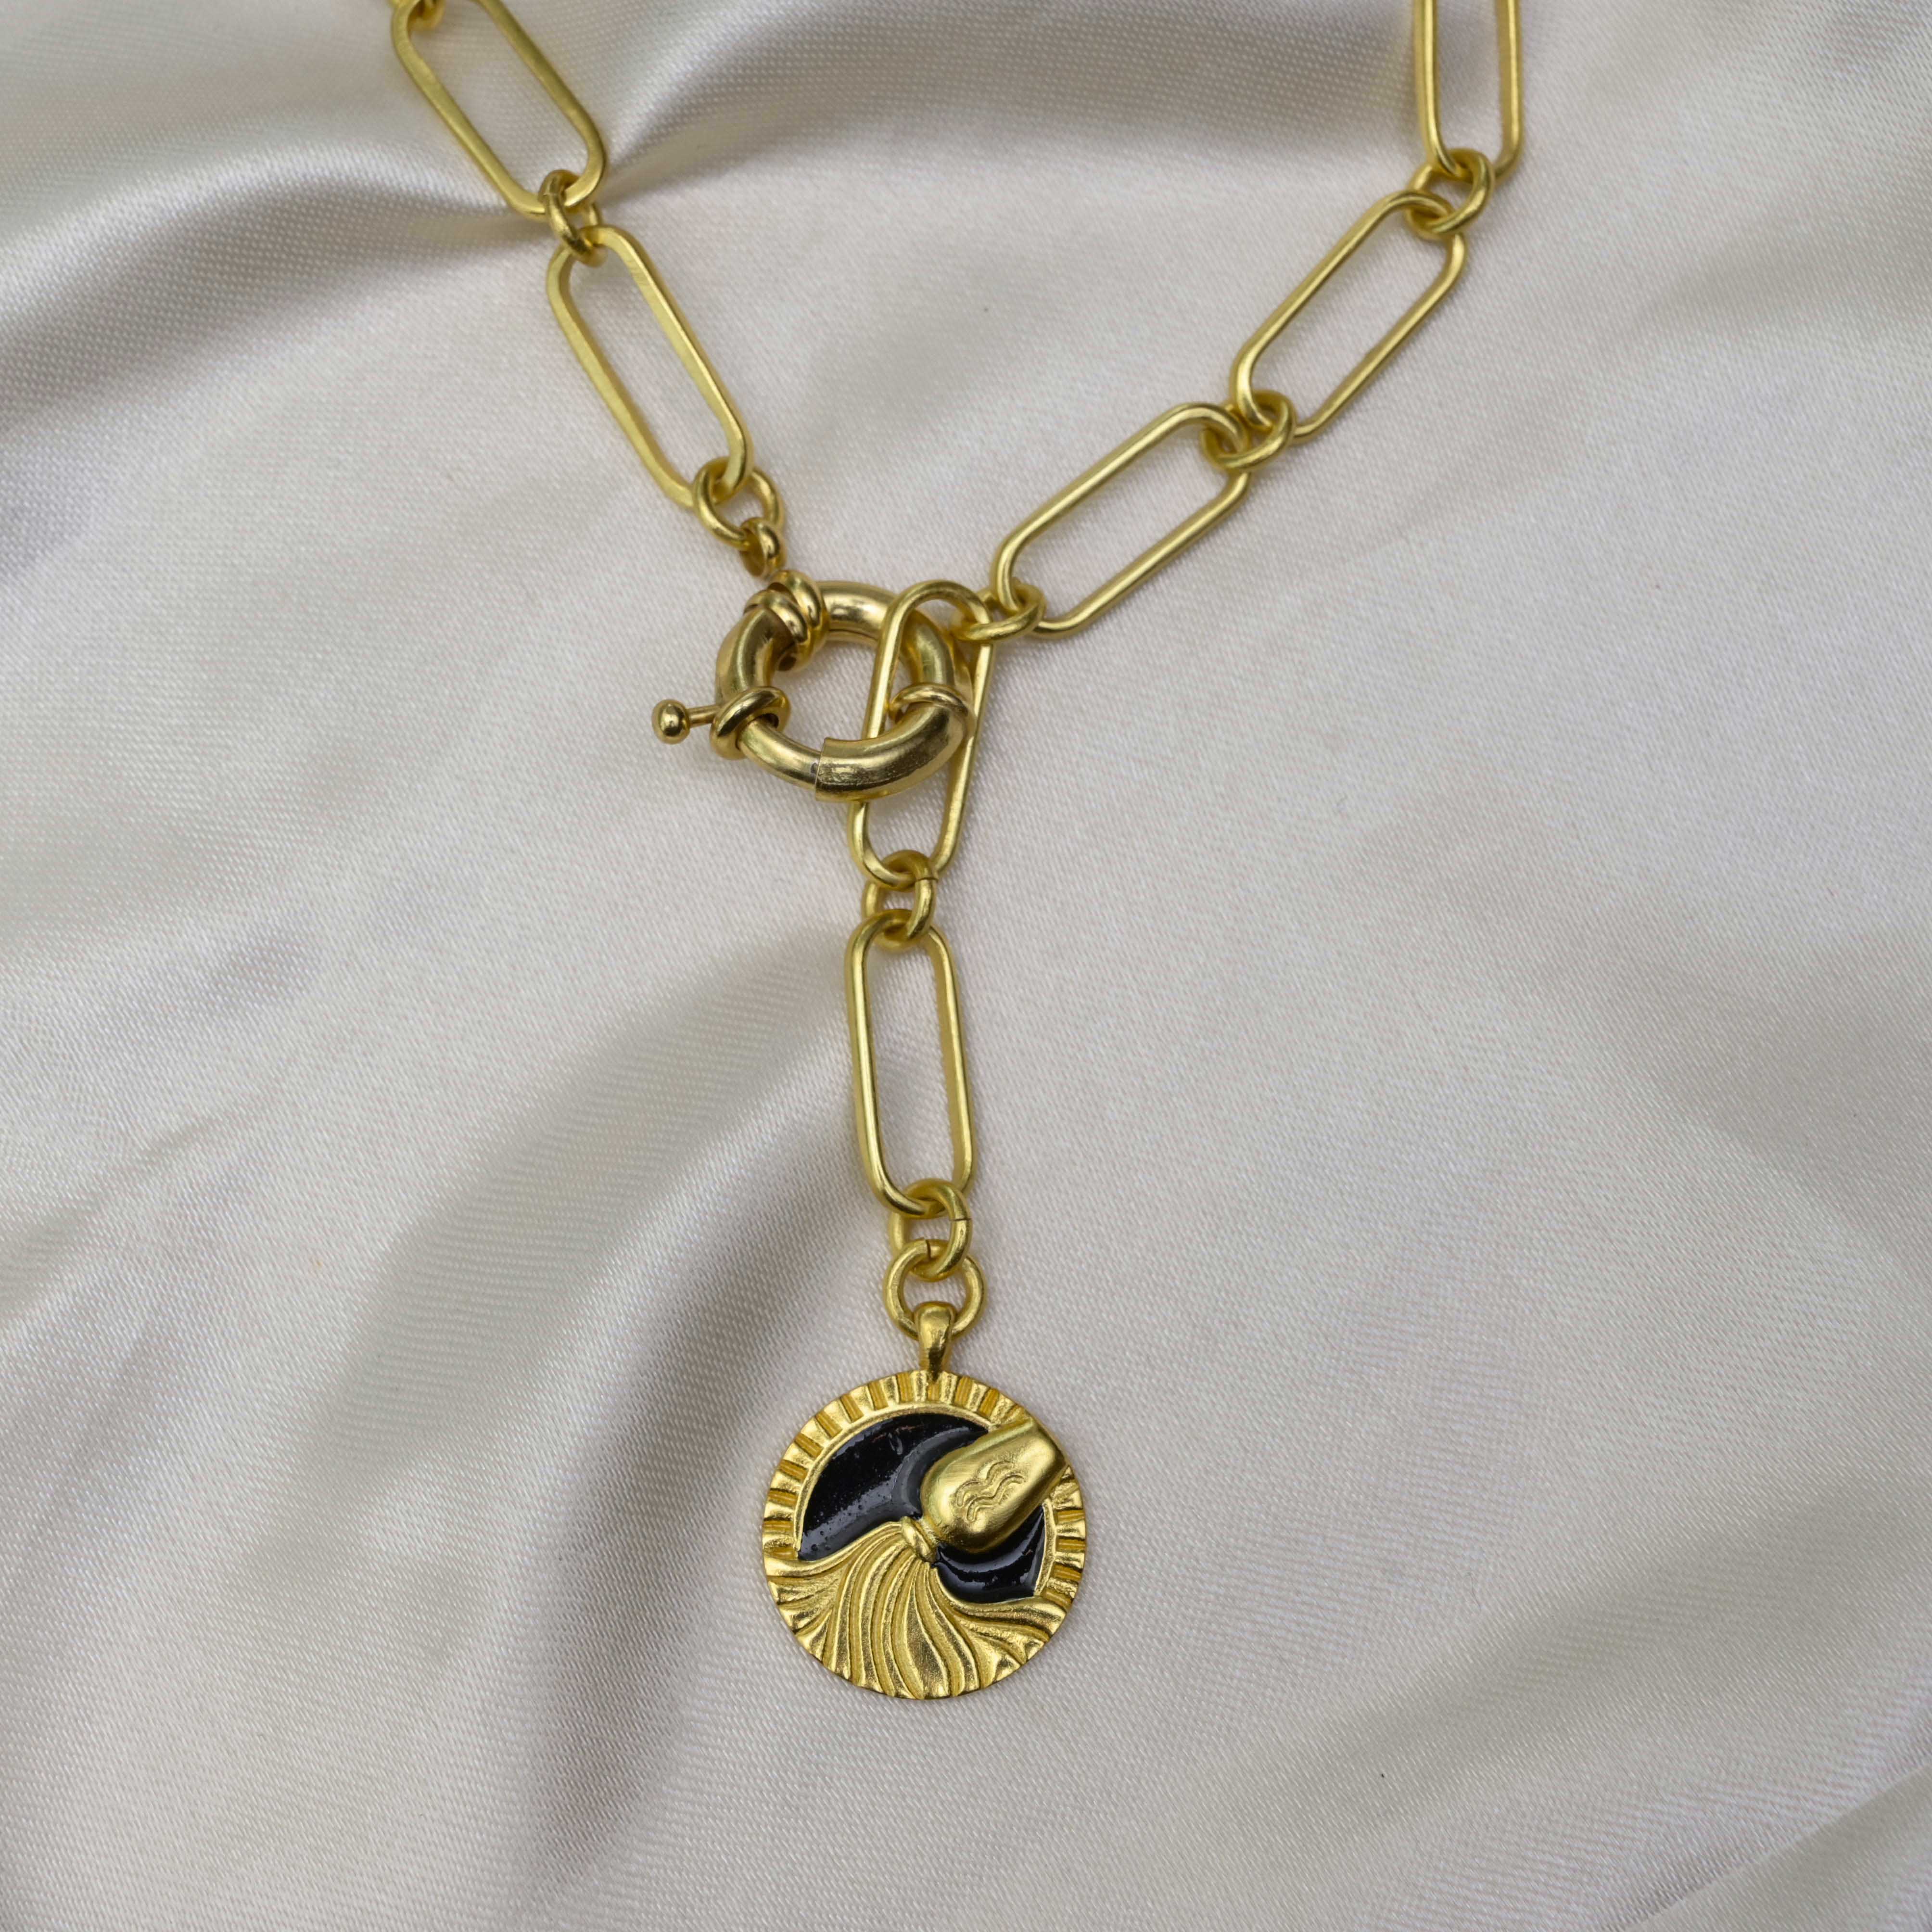 Vintage Gold Graduated-Twist Rope Necklace | 17 3/8